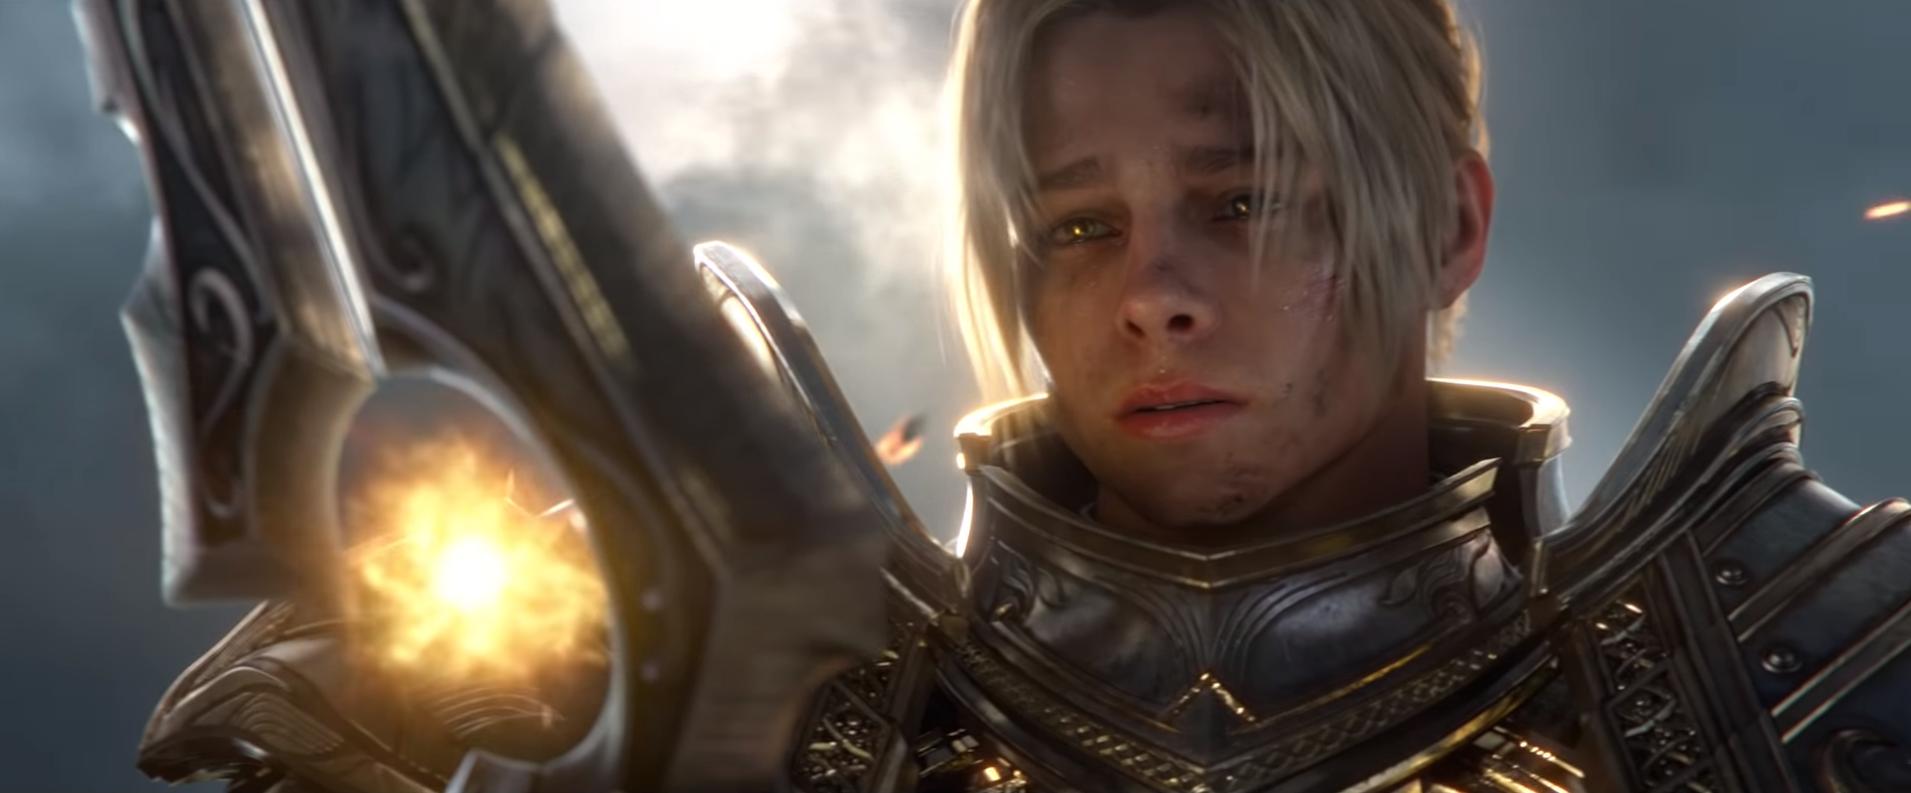 Anduin Wrynn looks at his glowing World of Warcraft sword.